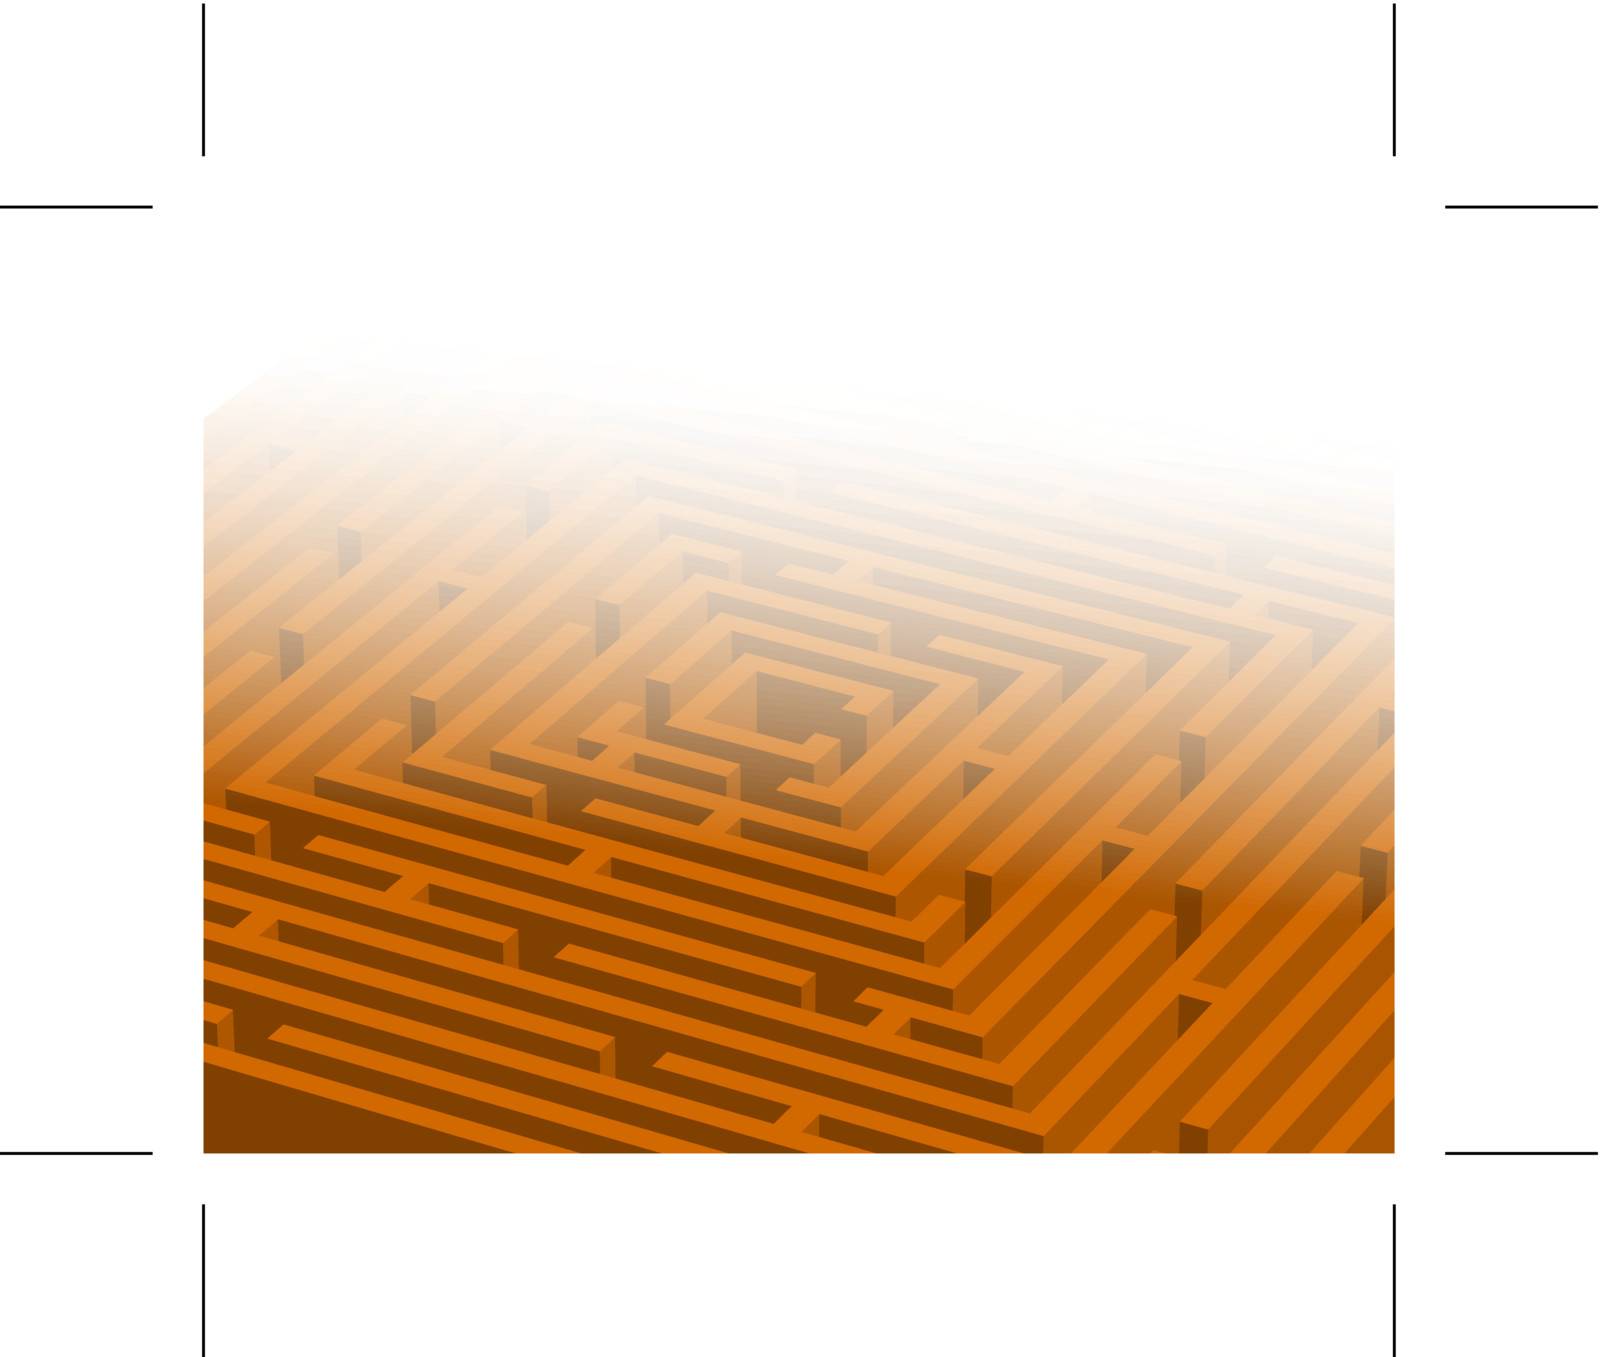 Abstract background with a big orange maze / labyrinth